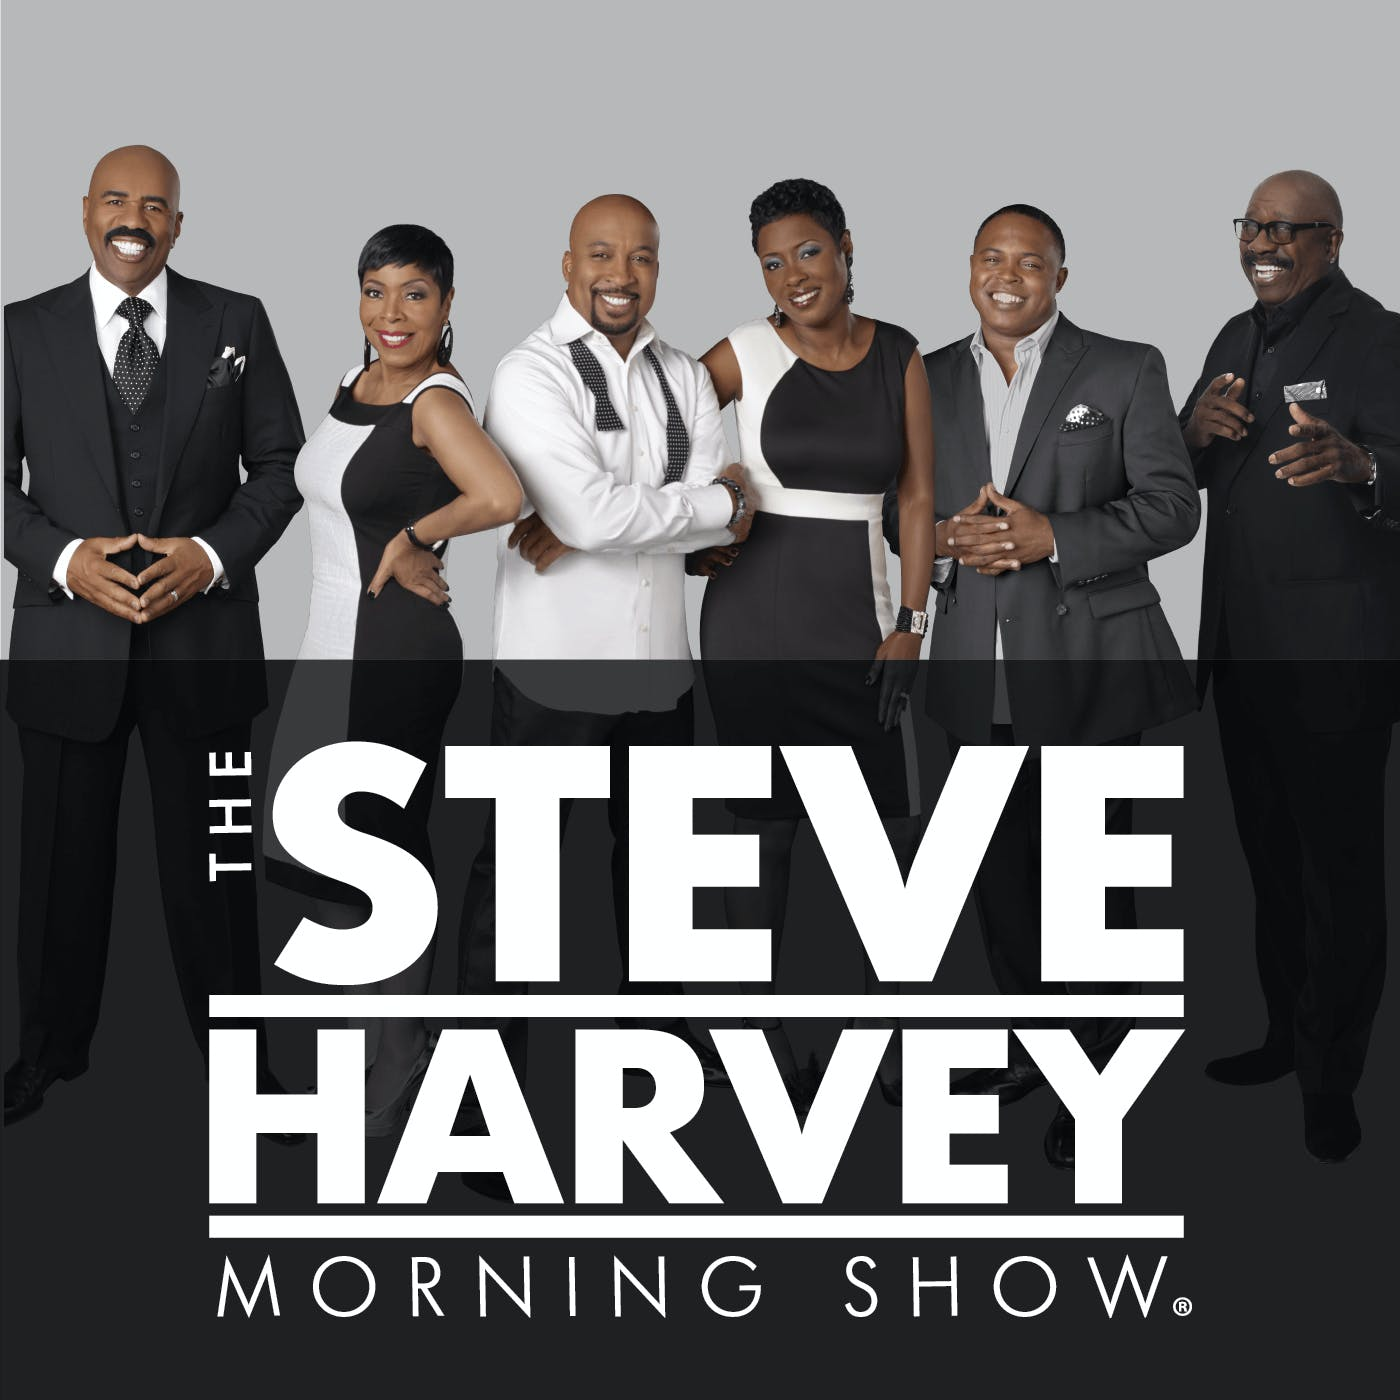 Steve's $1 Million Dollars, Are You Smarter Than Tommy, Tiffany Haddish, Rev. Adnoid, Sexlationship, Viral Dance, Weekend Confessions, Morning Inspiration and more.